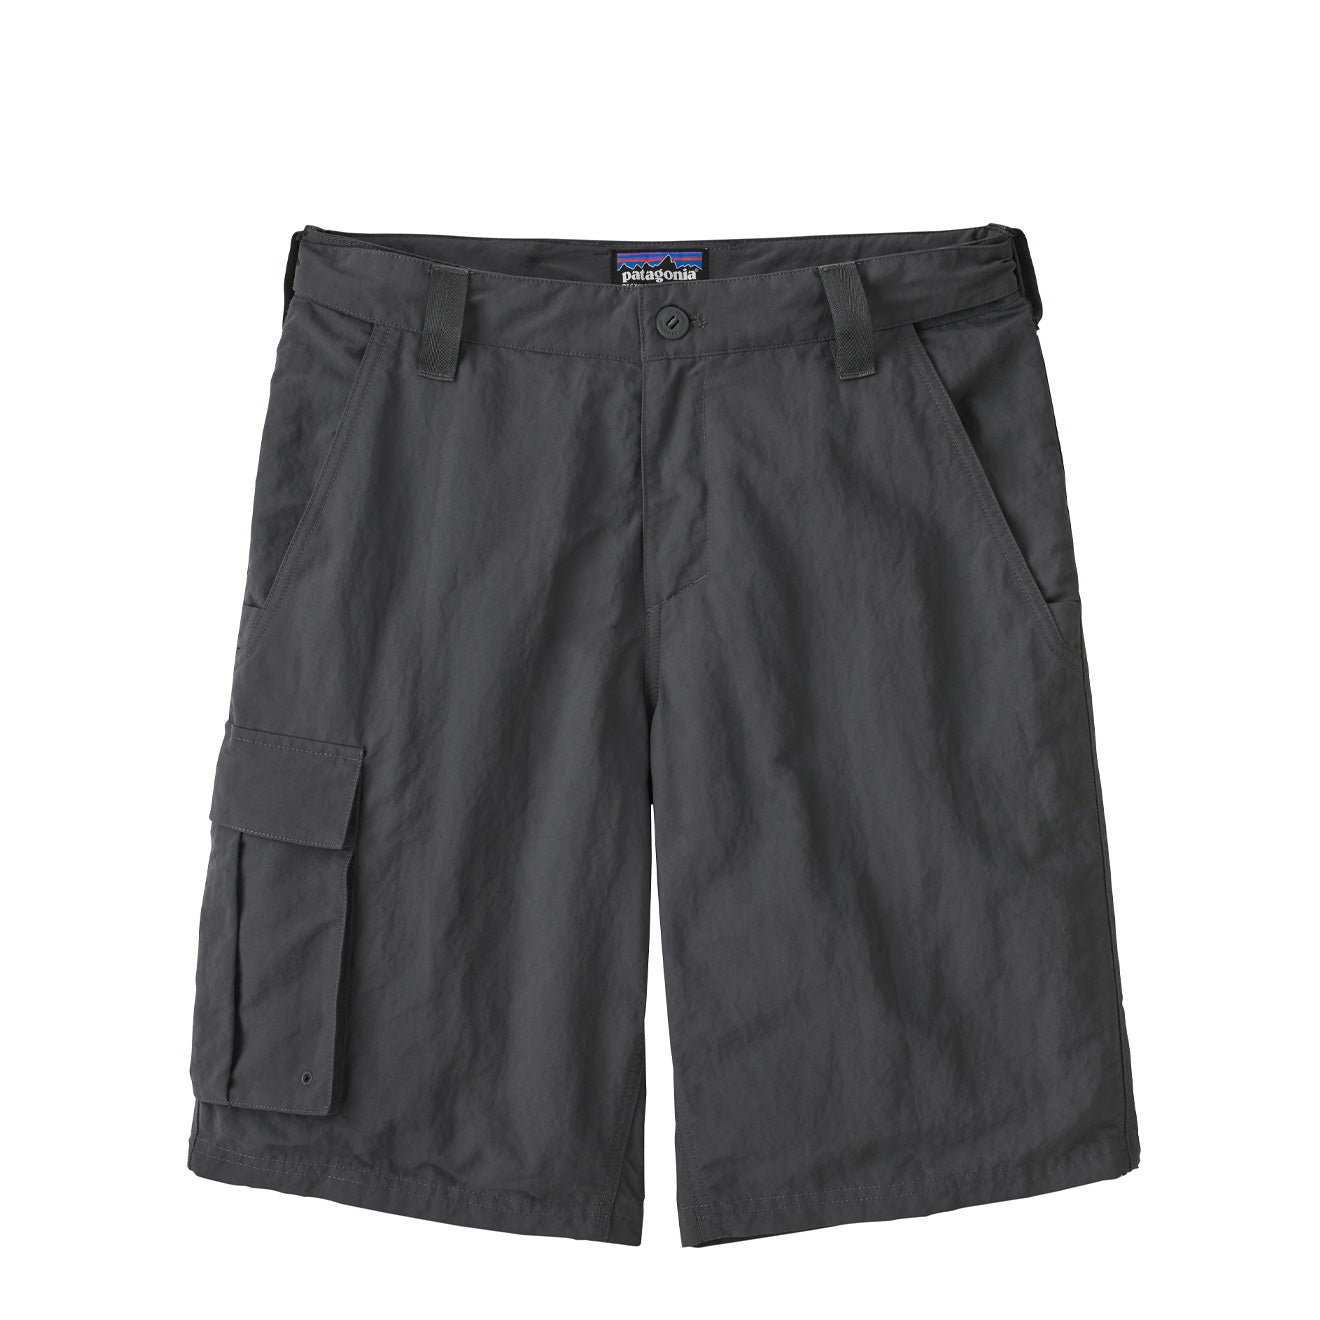 Patagonia Swiftcurrent Wet Wade Shorts Forge Grey | The Sporting Lodge